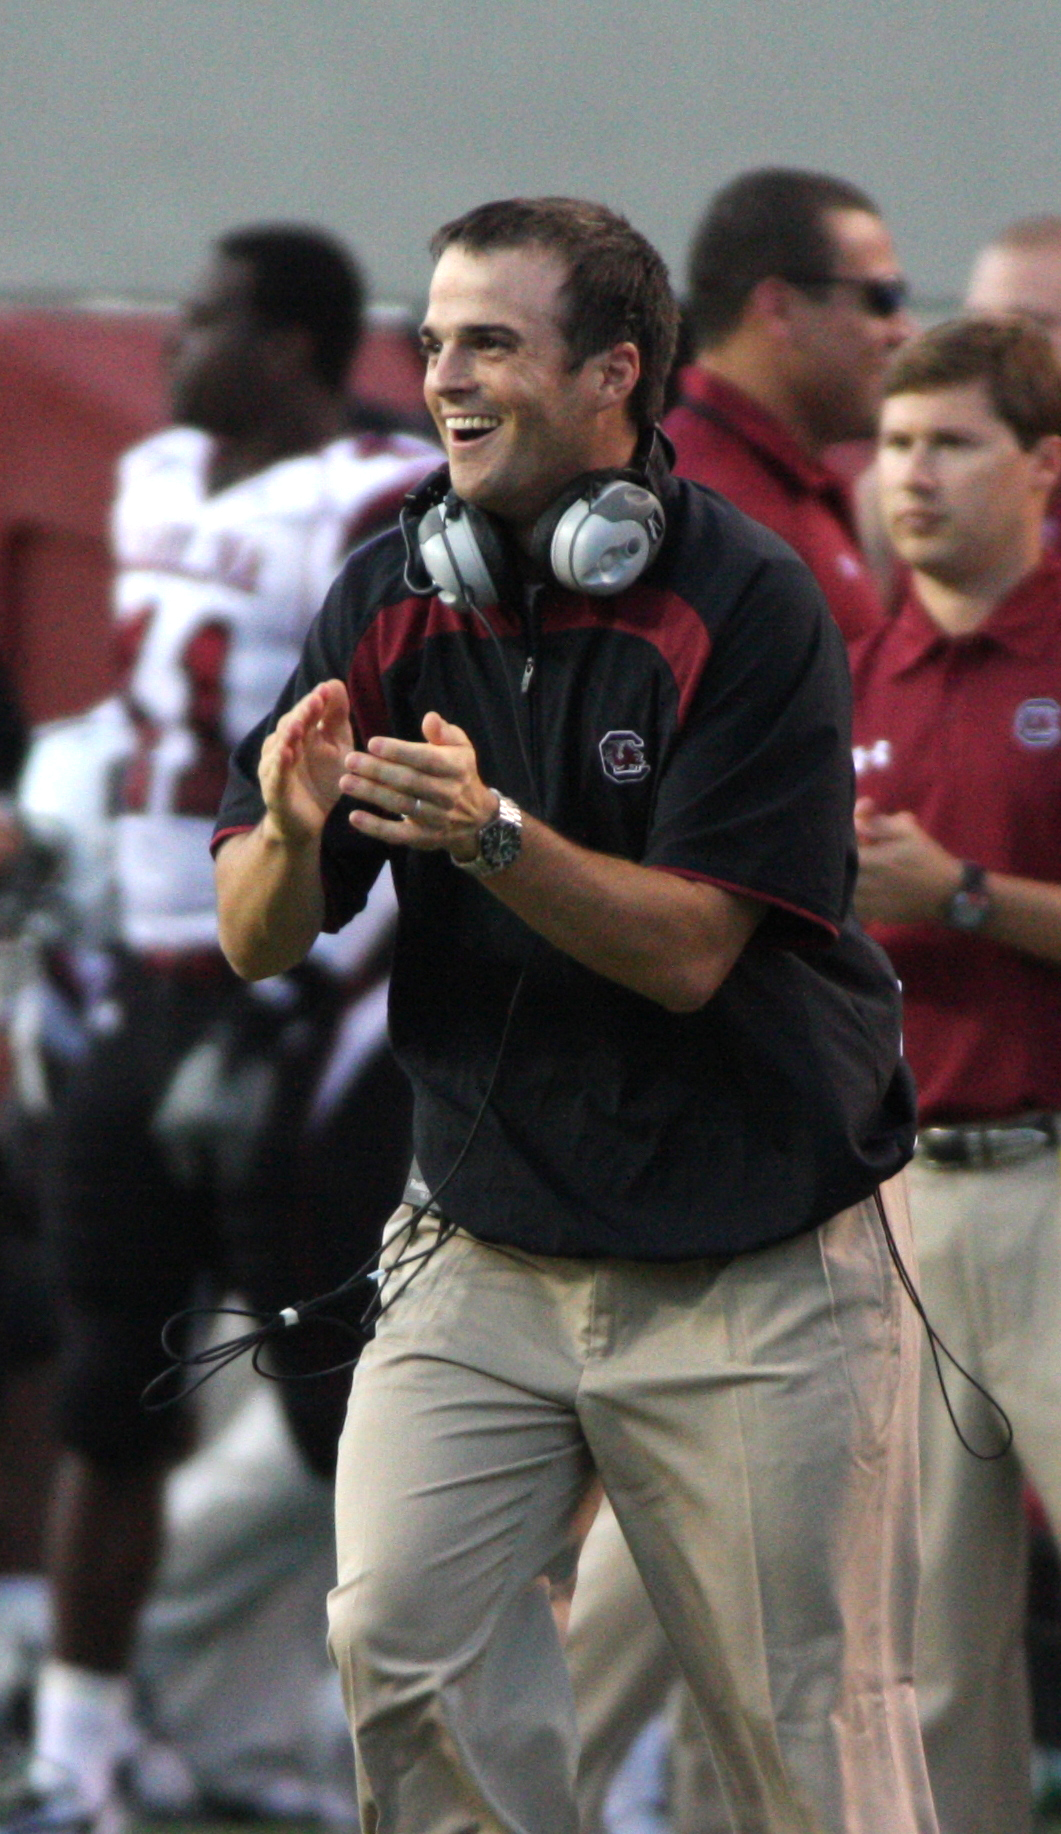  Shane and Emily both enjoyed Shane’s time as assistant coach under Coach Steve Spurrier.